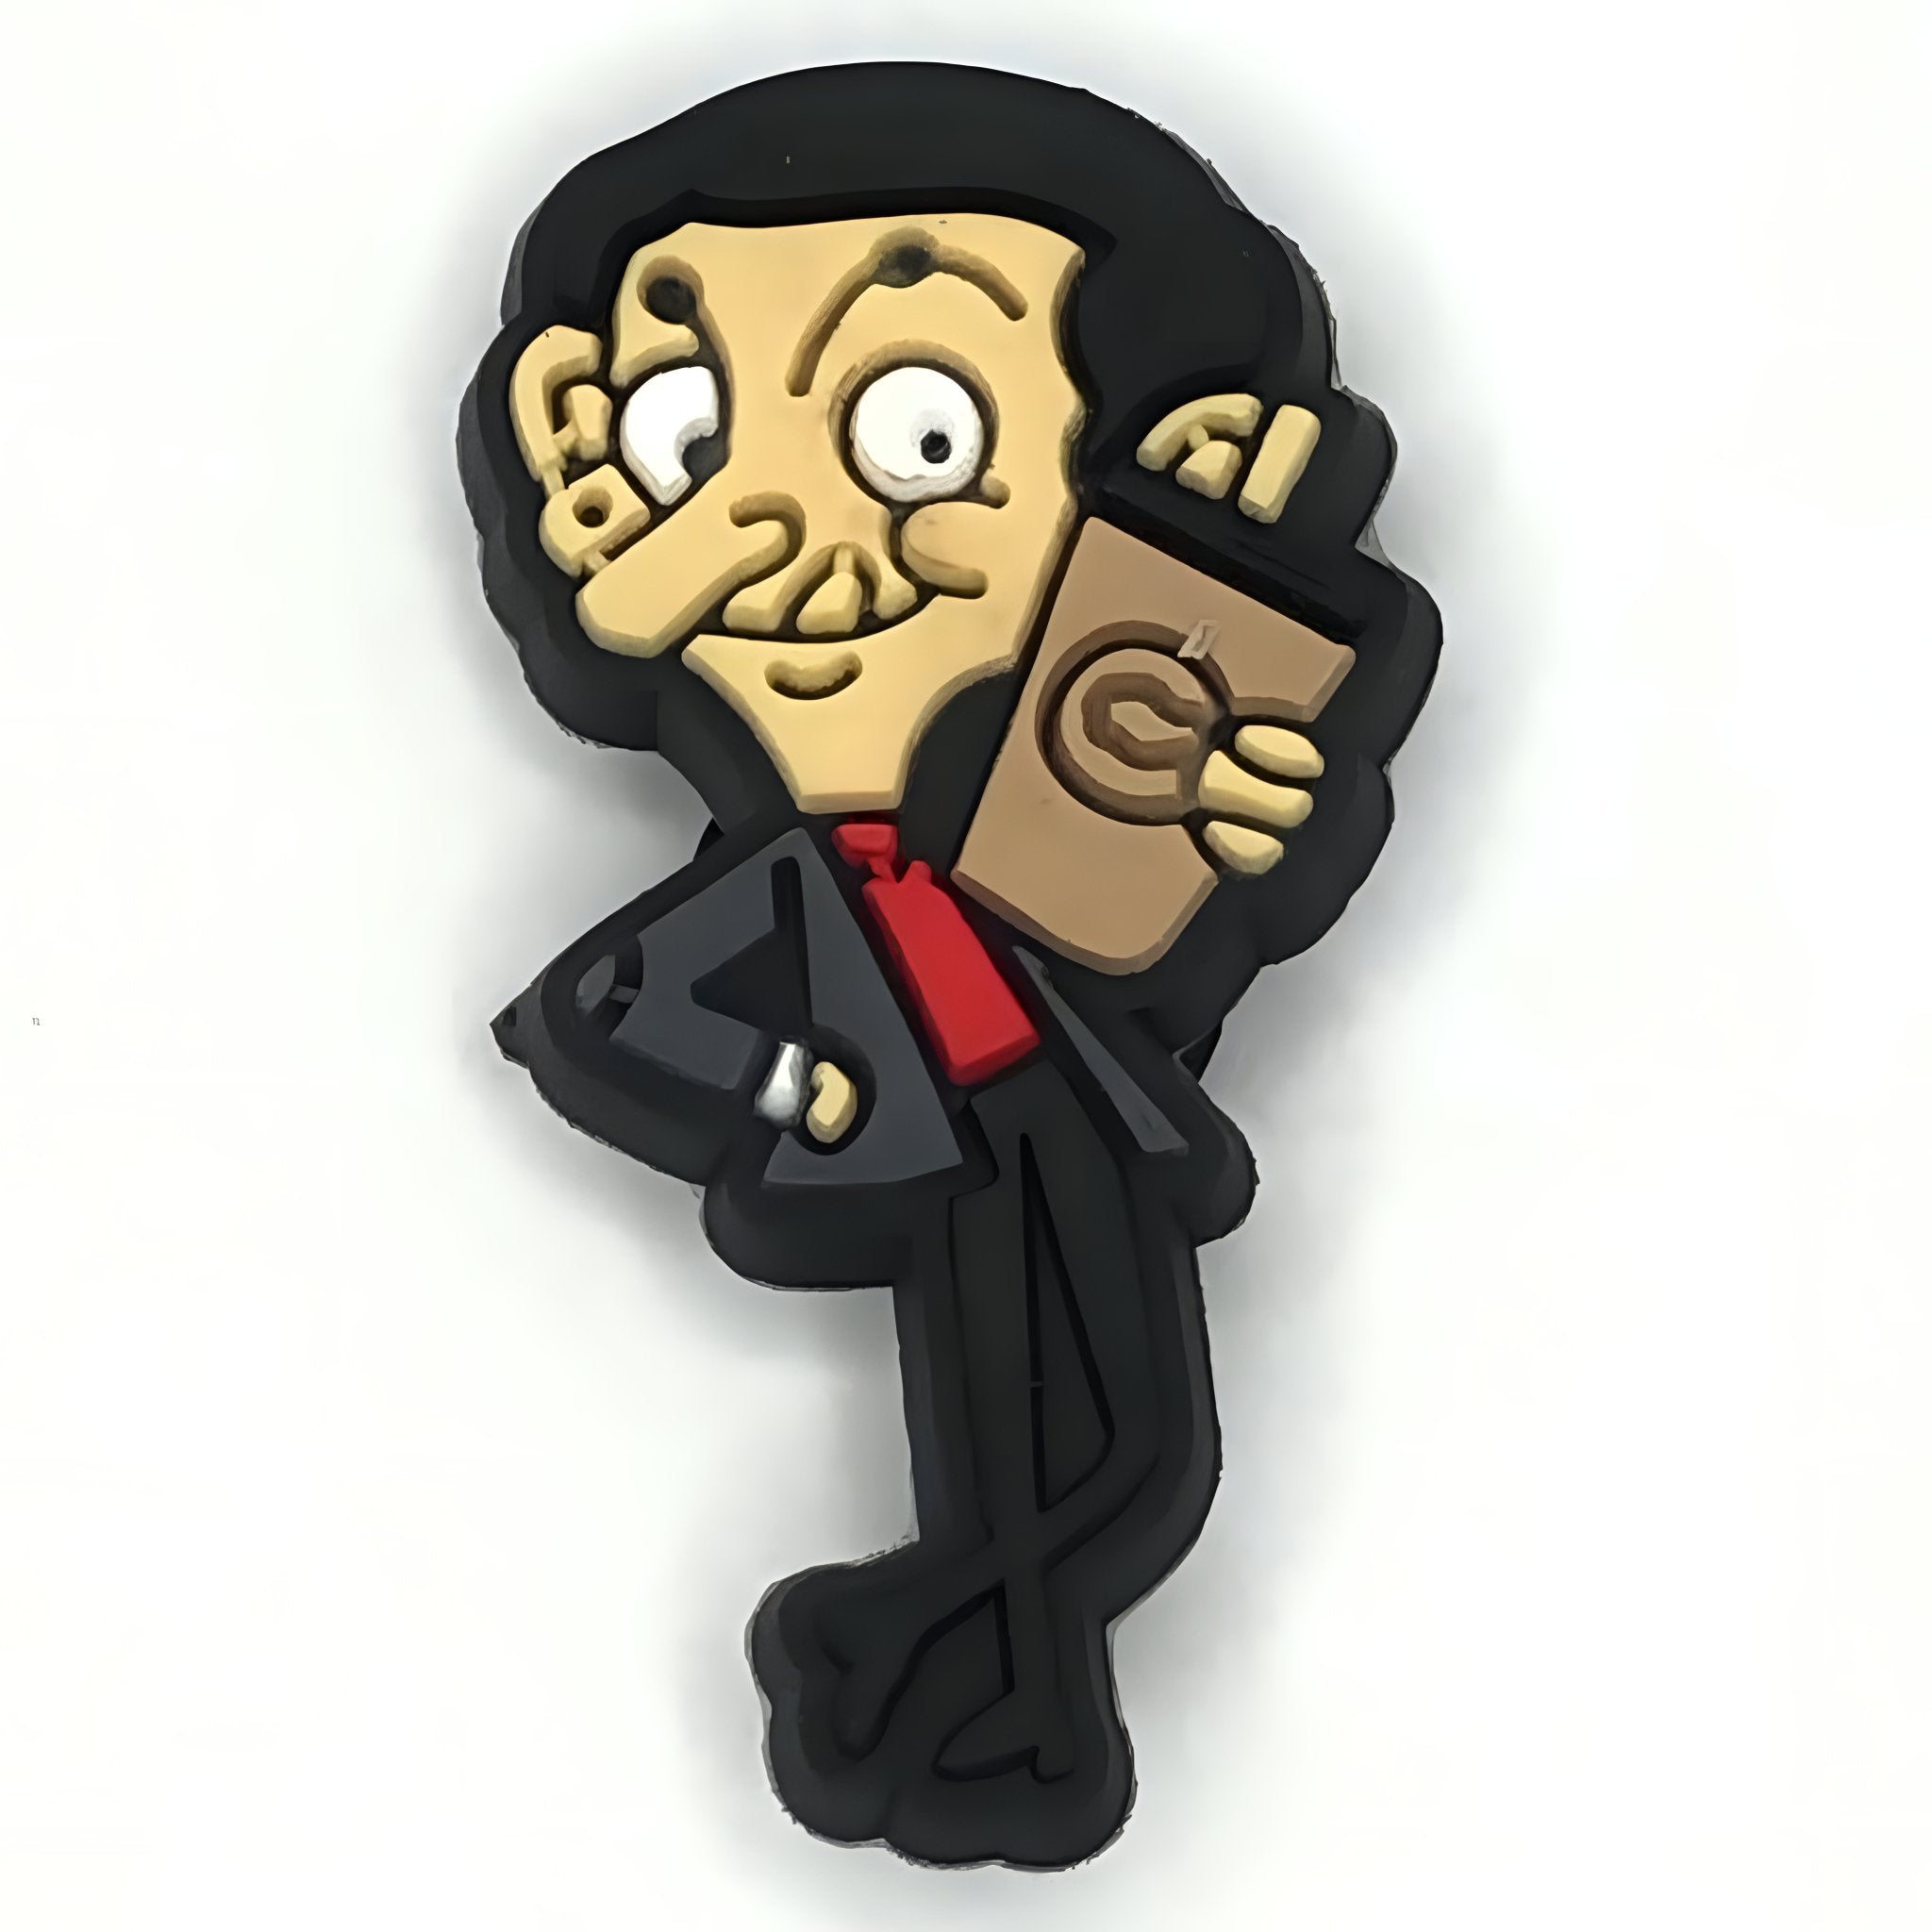 "Mr. Bean Charm 😄🎩: Classic Comedy Style!" - Questsole